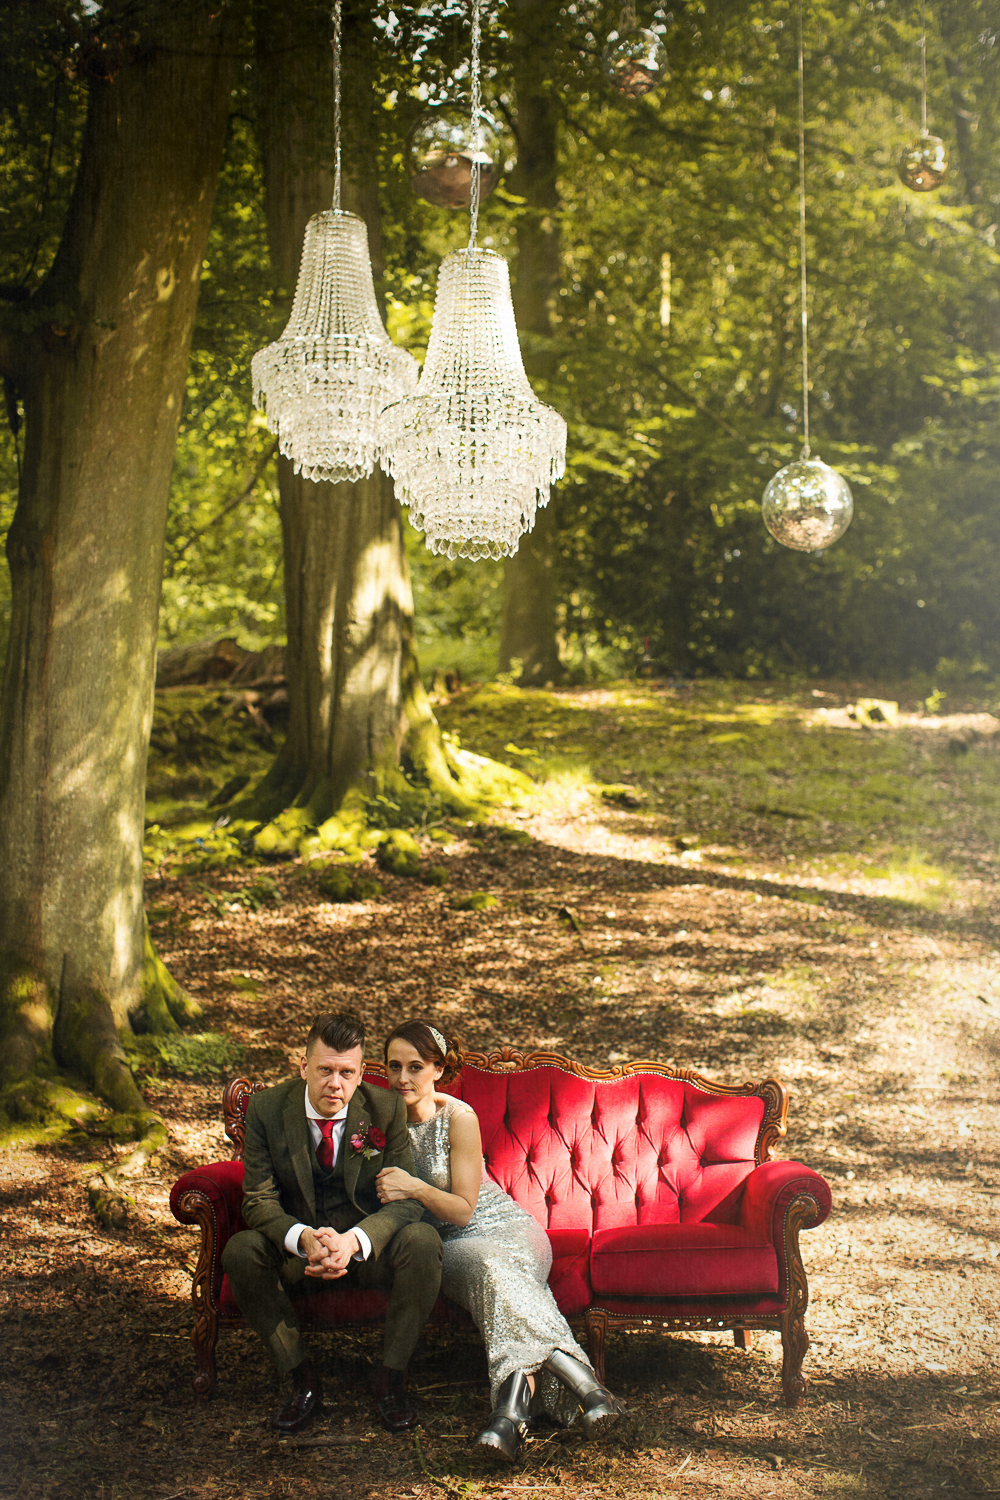 Pocketful of Dreams_matt parry photography_Red velvet furniture_chandeliers_tom Dixon Lights_outdoor_woodland_cool couple